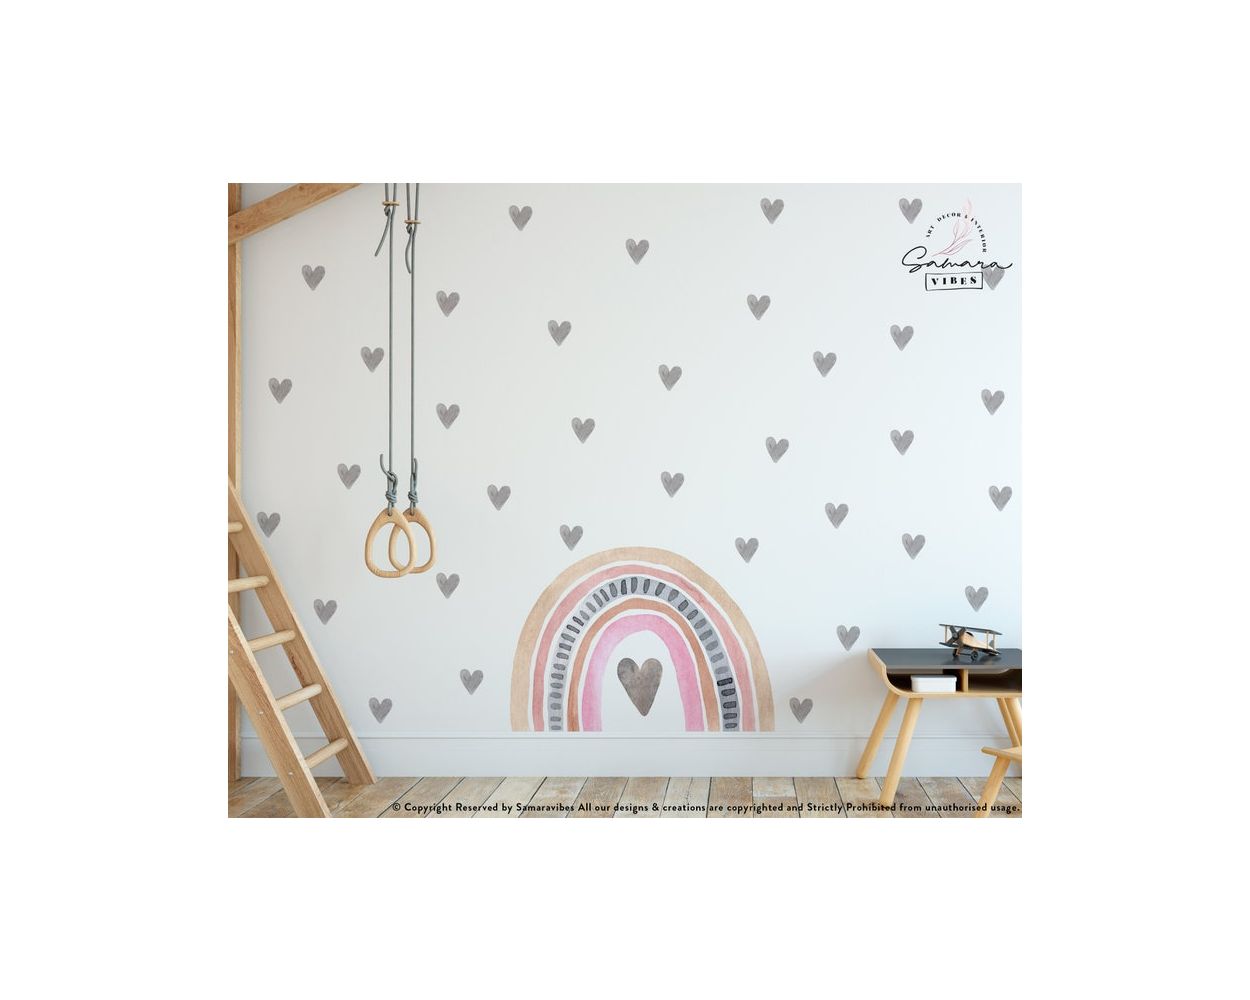 Best Rainbow with Heart vinyl Wall Stickers for Kids Room Decor